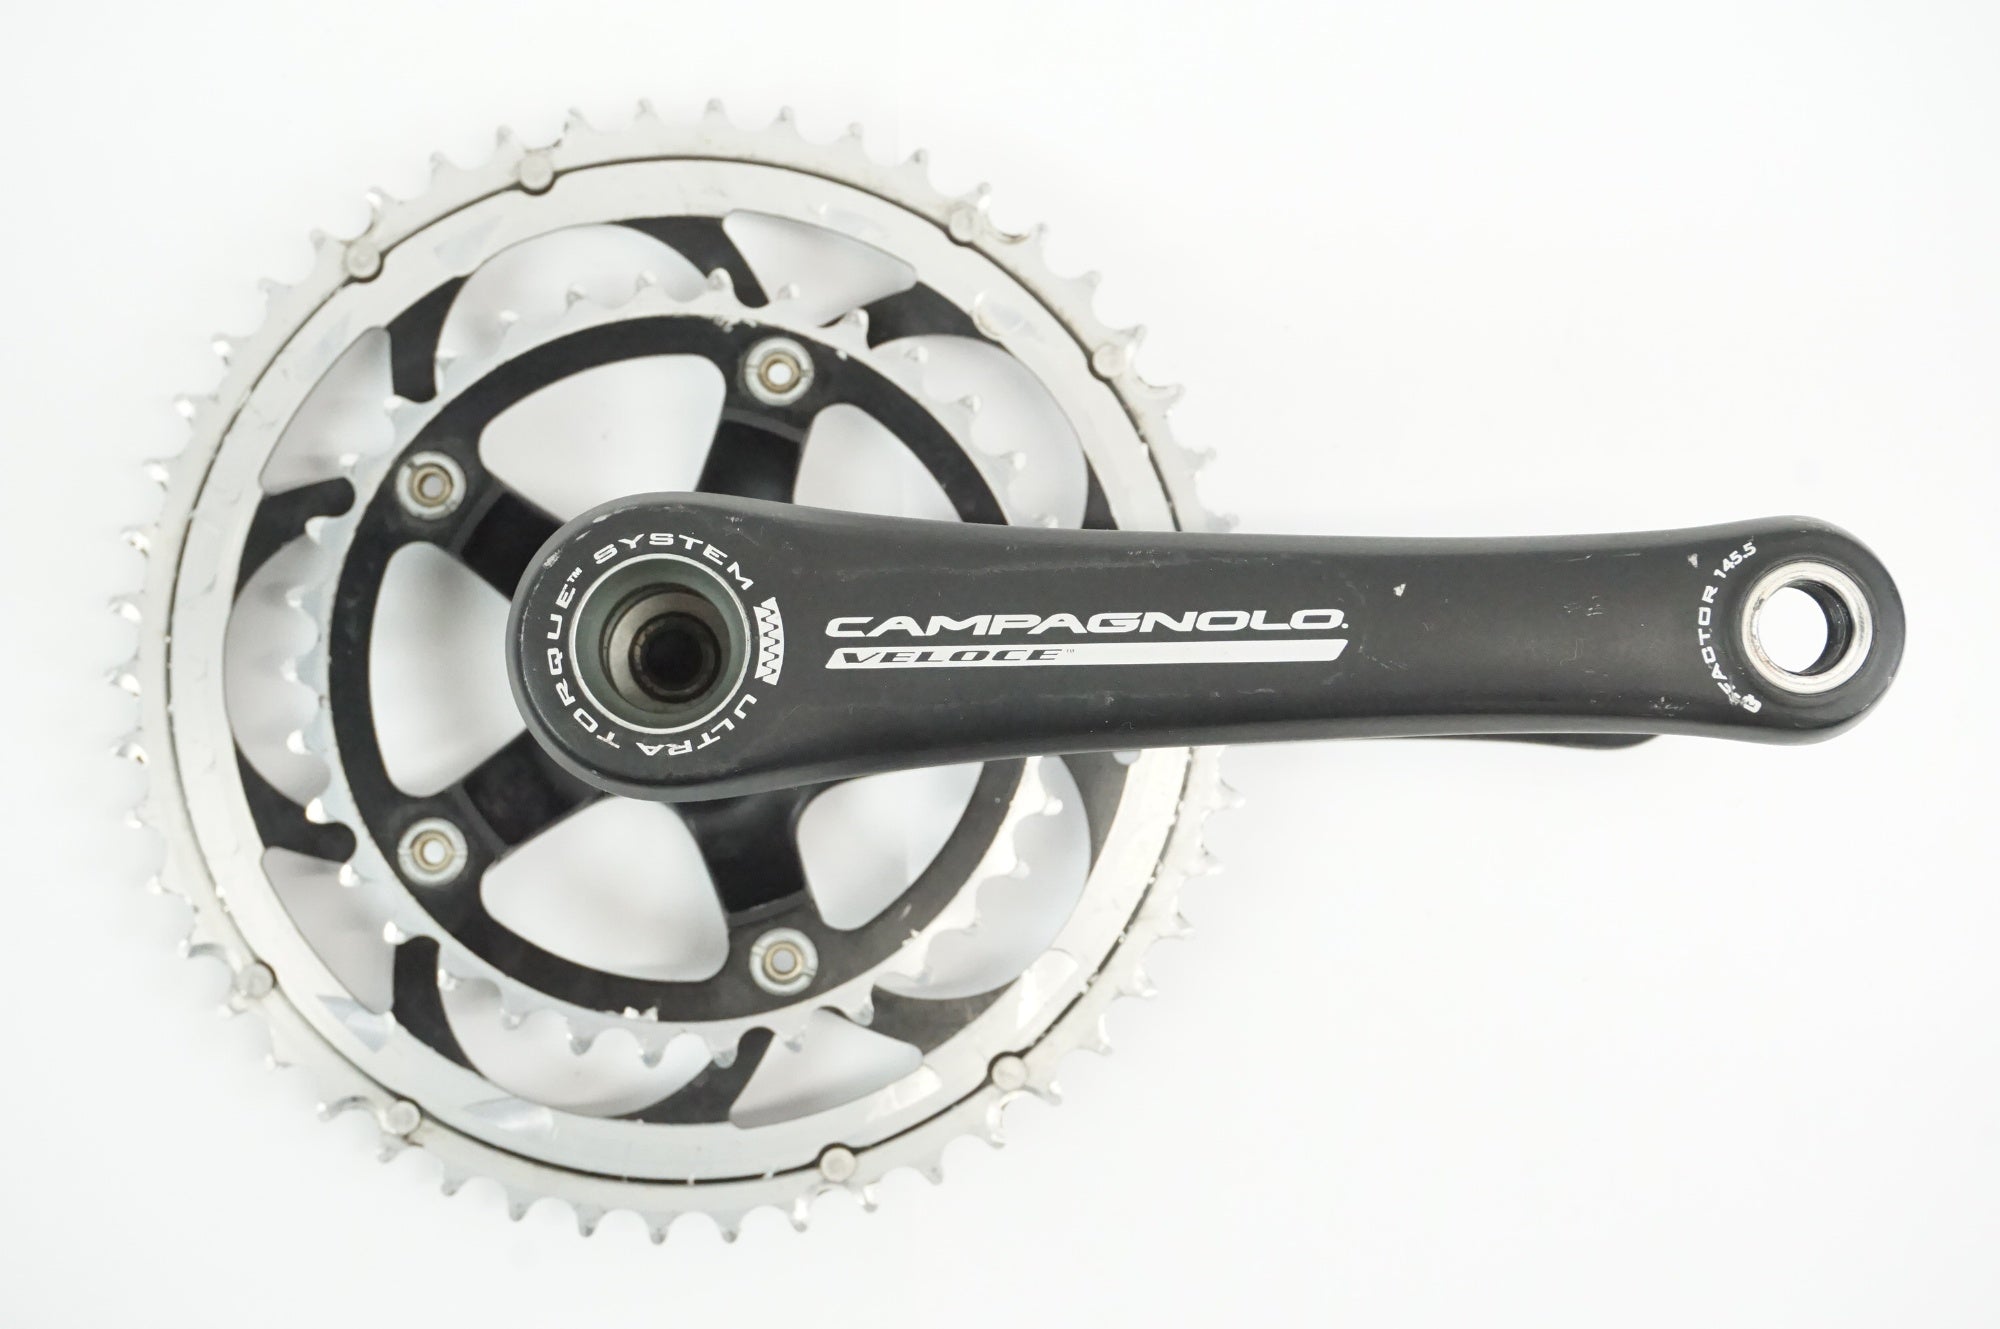 CAMPAGNOLO 「カンパニョーロ」 VELOCE (2009 10s) コンポセット / 宇都宮店